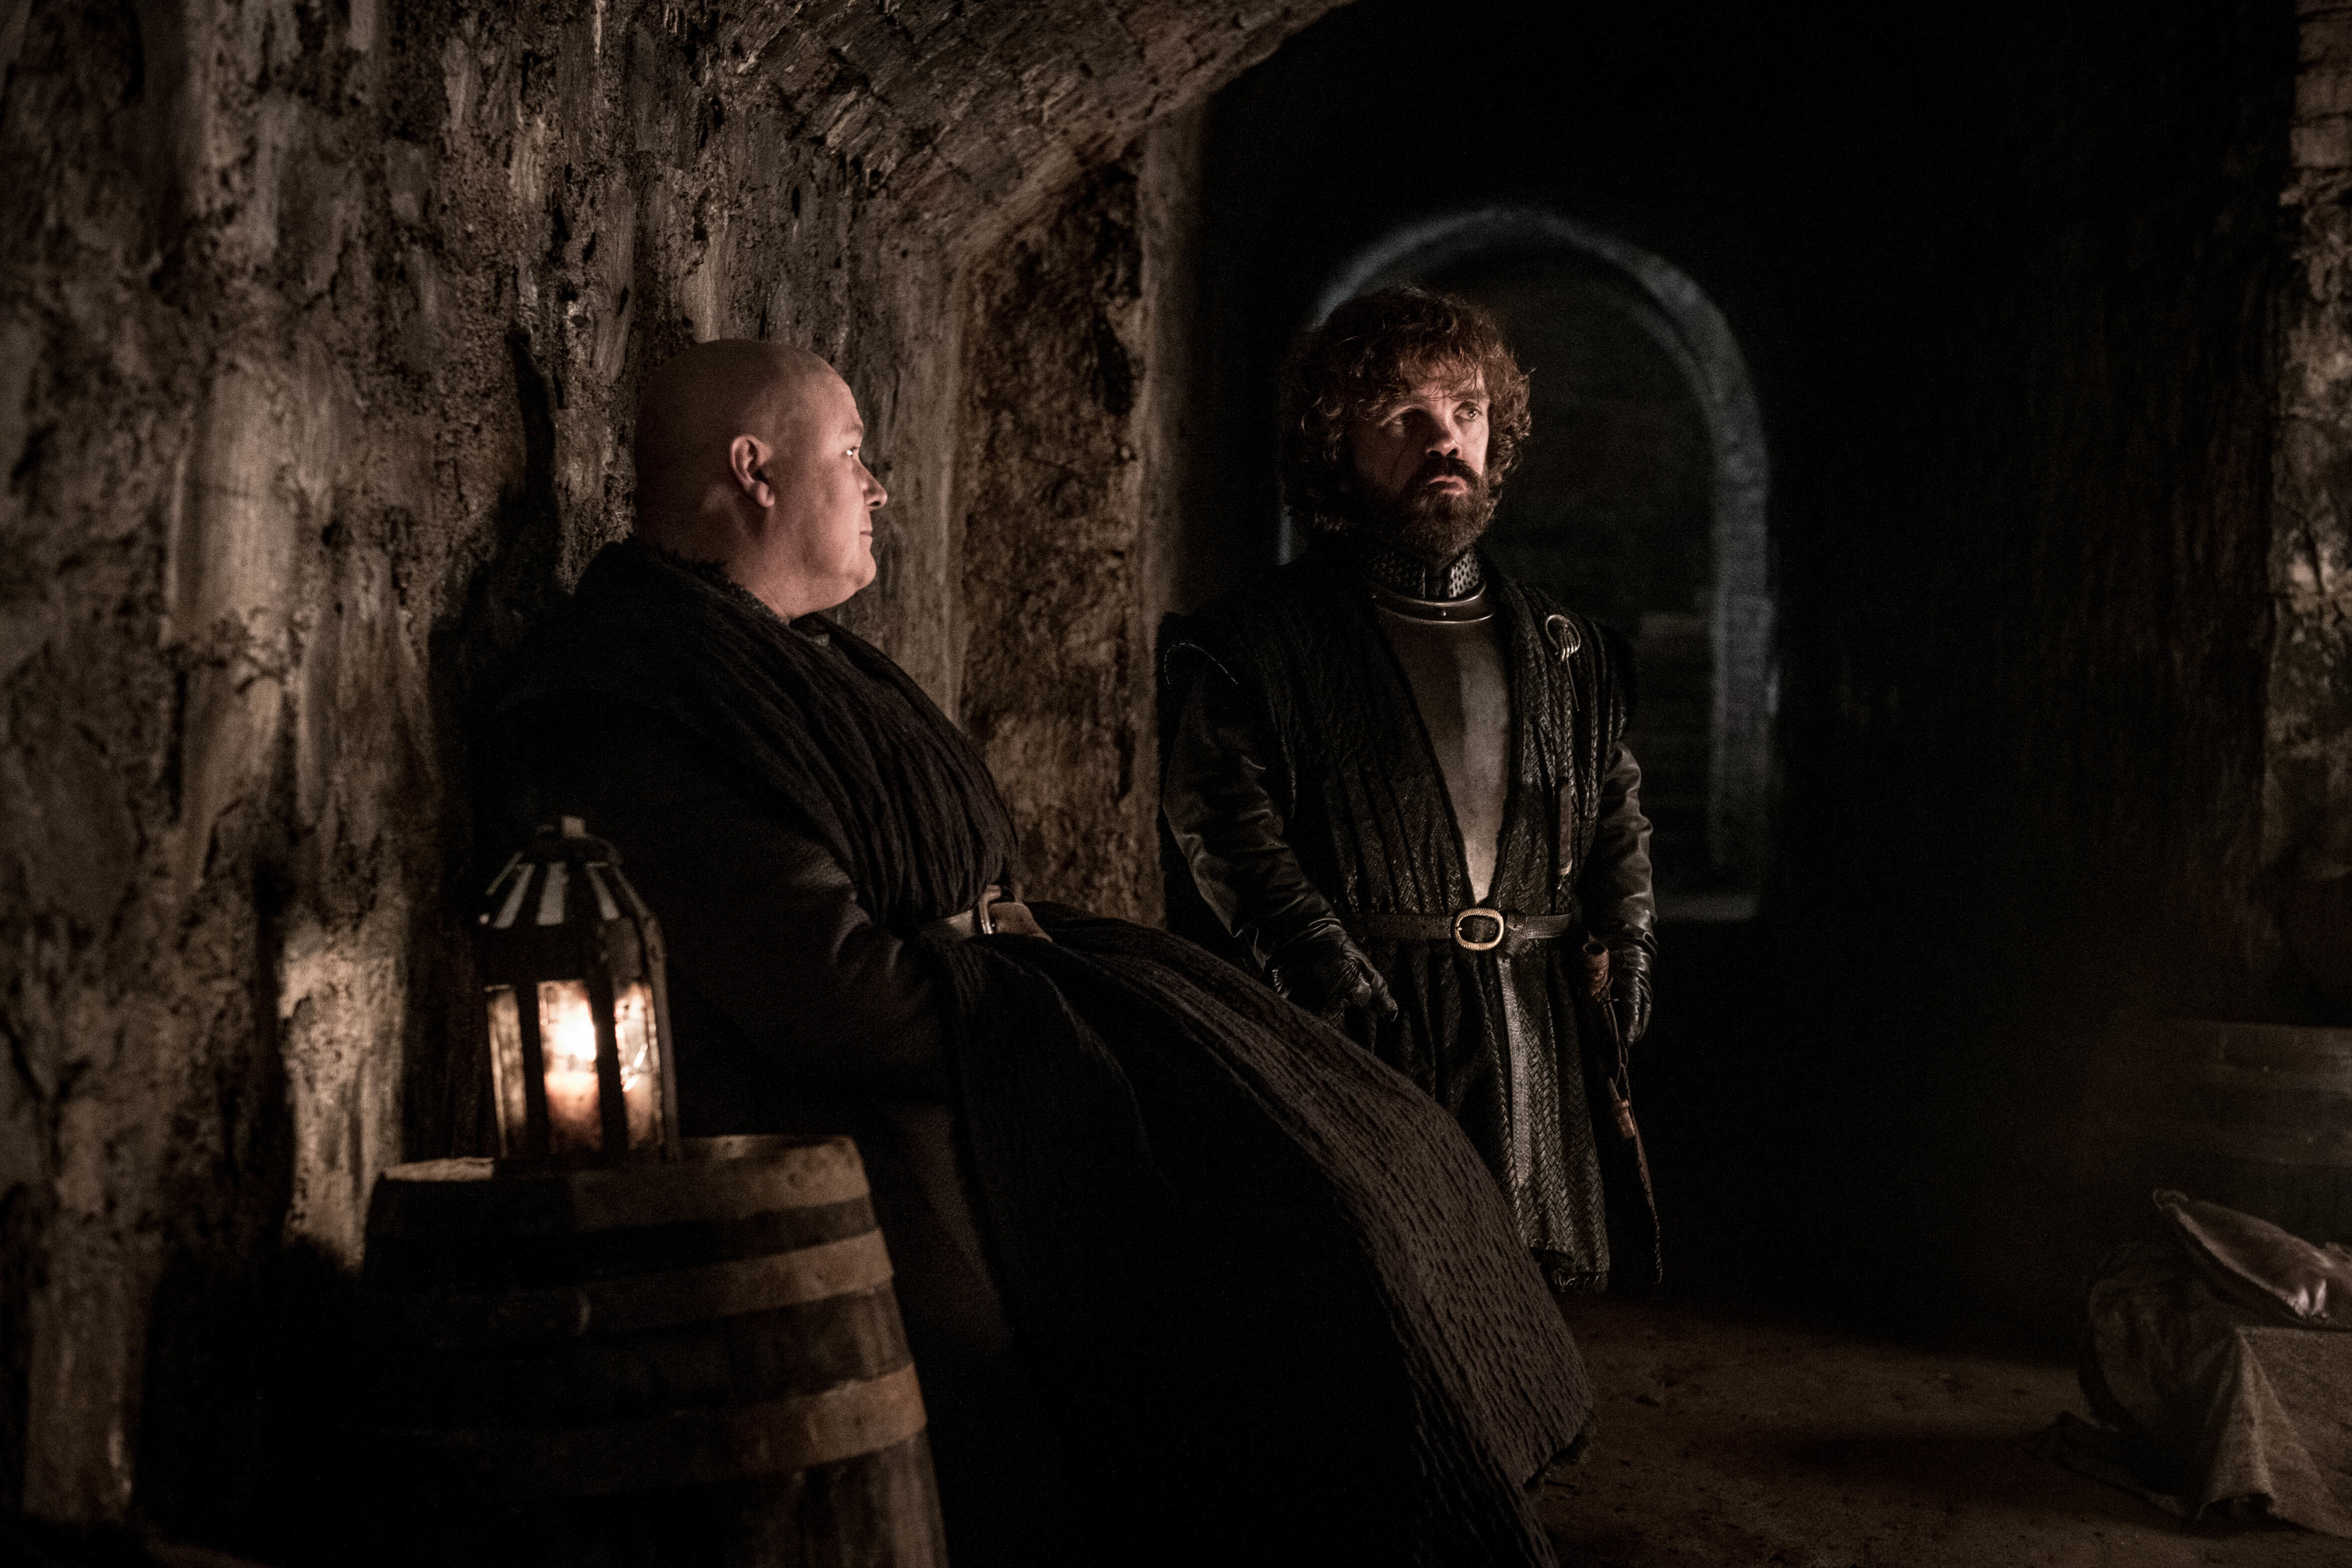 Conleth Hill as Varys and Peter Dinklage as Tyrion Lannister. (Helen Sloan/HBO)